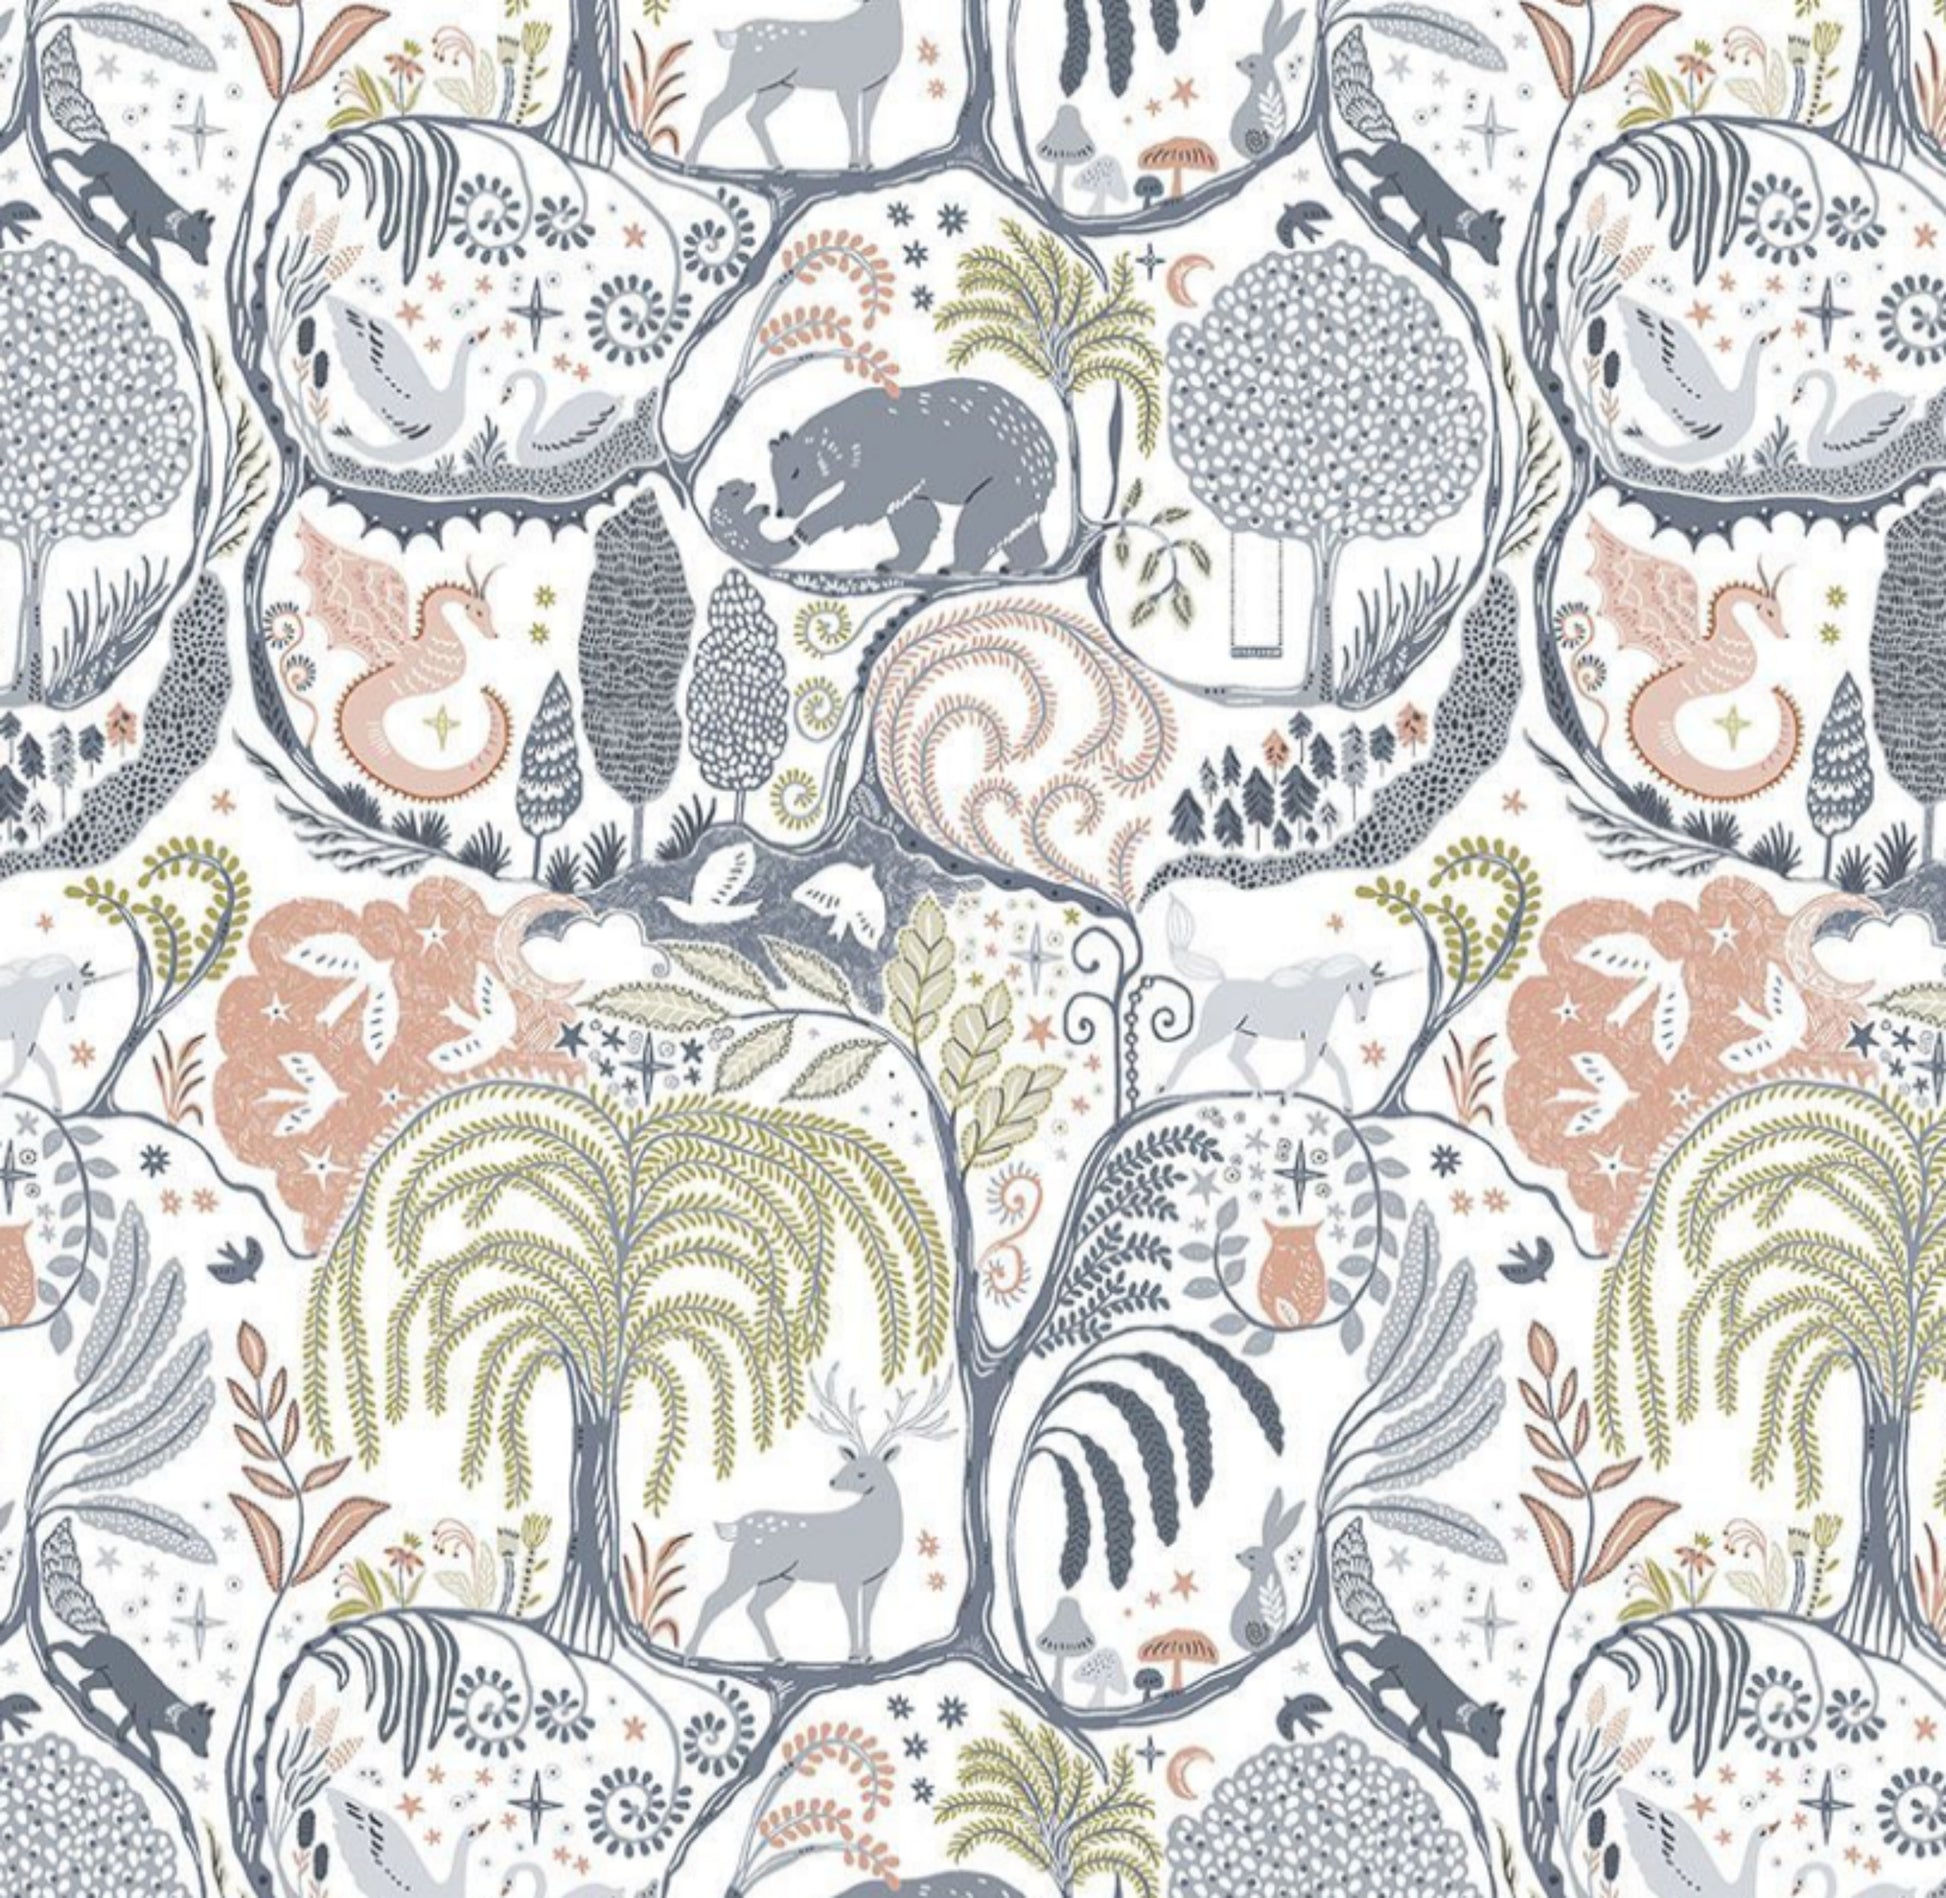 Secret Forest from the Secret Forest Collection by Dear Stella Fabrics